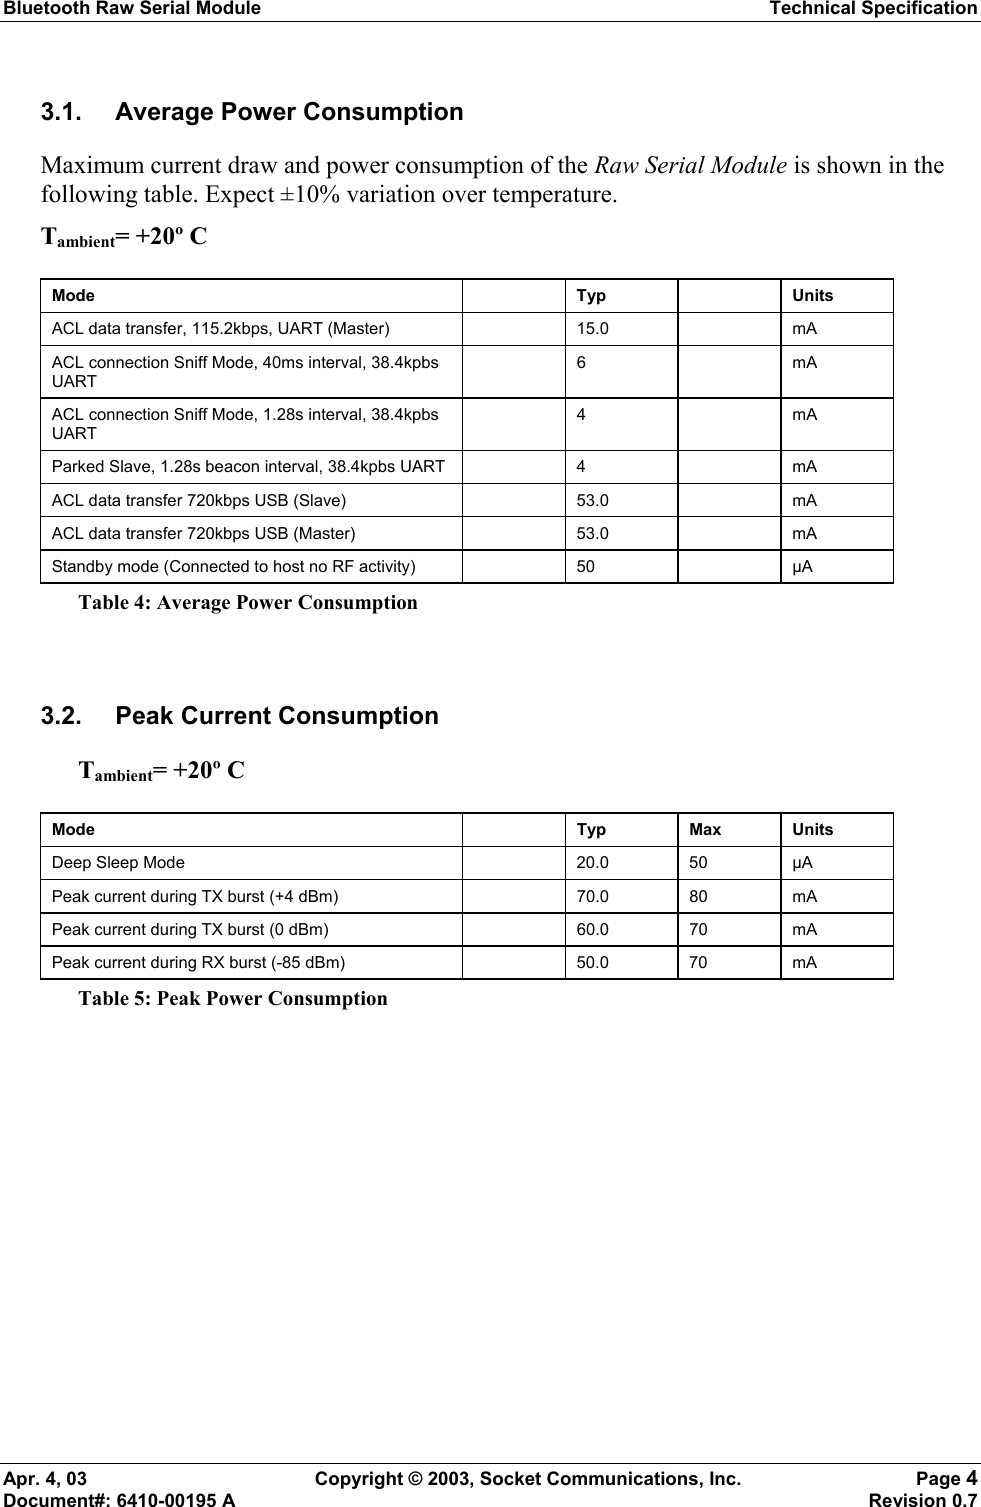 Bluetooth Raw Serial Module Technical Specification Apr. 4, 03  Copyright © 2003, Socket Communications, Inc.  Page 4 Document#: 6410-00195 A    Revision 0.7 3.1.  Average Power Consumption Maximum current draw and power consumption of the Raw Serial Module is shown in the following table. Expect ±10% variation over temperature. Tambient= +20º C  Mode   Typ  Units ACL data transfer, 115.2kbps, UART (Master)    15.0    mA ACL connection Sniff Mode, 40ms interval, 38.4kpbs UART  6  mA ACL connection Sniff Mode, 1.28s interval, 38.4kpbs UART  4  mA Parked Slave, 1.28s beacon interval, 38.4kpbs UART    4    mA ACL data transfer 720kbps USB (Slave)    53.0    mA ACL data transfer 720kbps USB (Master)     53.0    mA Standby mode (Connected to host no RF activity)    50    µA Table 4: Average Power Consumption  3.2.  Peak Current Consumption Tambient= +20º C  Mode  Typ Max Units Deep Sleep Mode    20.0  50  µA Peak current during TX burst (+4 dBm)     70.0   80  mA Peak current during TX burst (0 dBm)     60.0  70  mA Peak current during RX burst (-85 dBm)     50.0  70  mA Table 5: Peak Power Consumption  